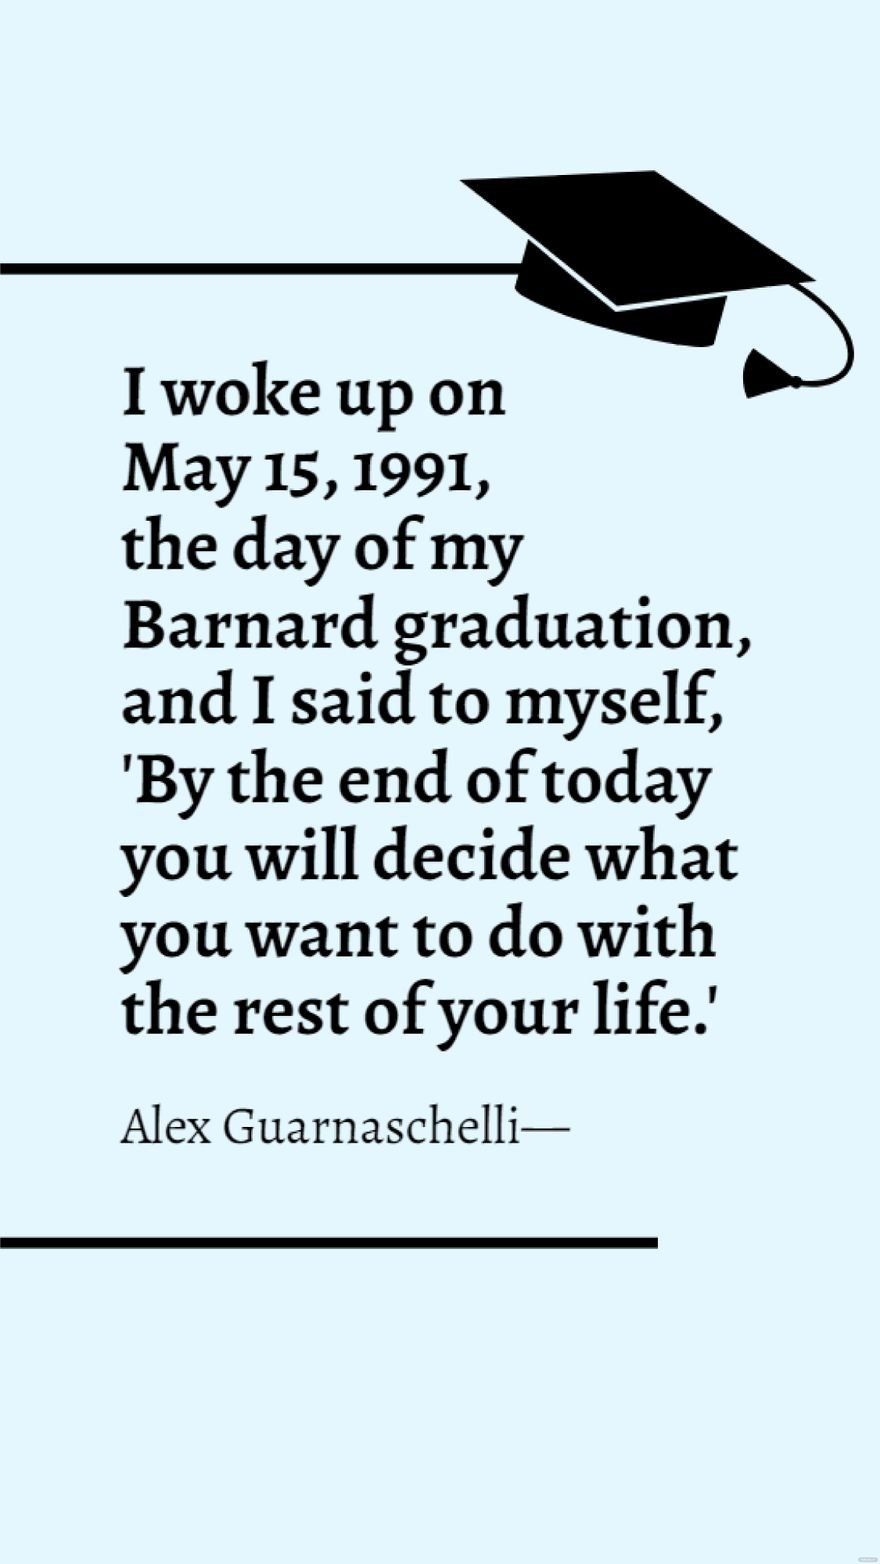 Alex Guarnaschelli - I woke up on May 15, 1991, the day of my Barnard graduation, and I said to myself, 'By the end of today you will decide what you want to do with the rest of your life.' in JPG